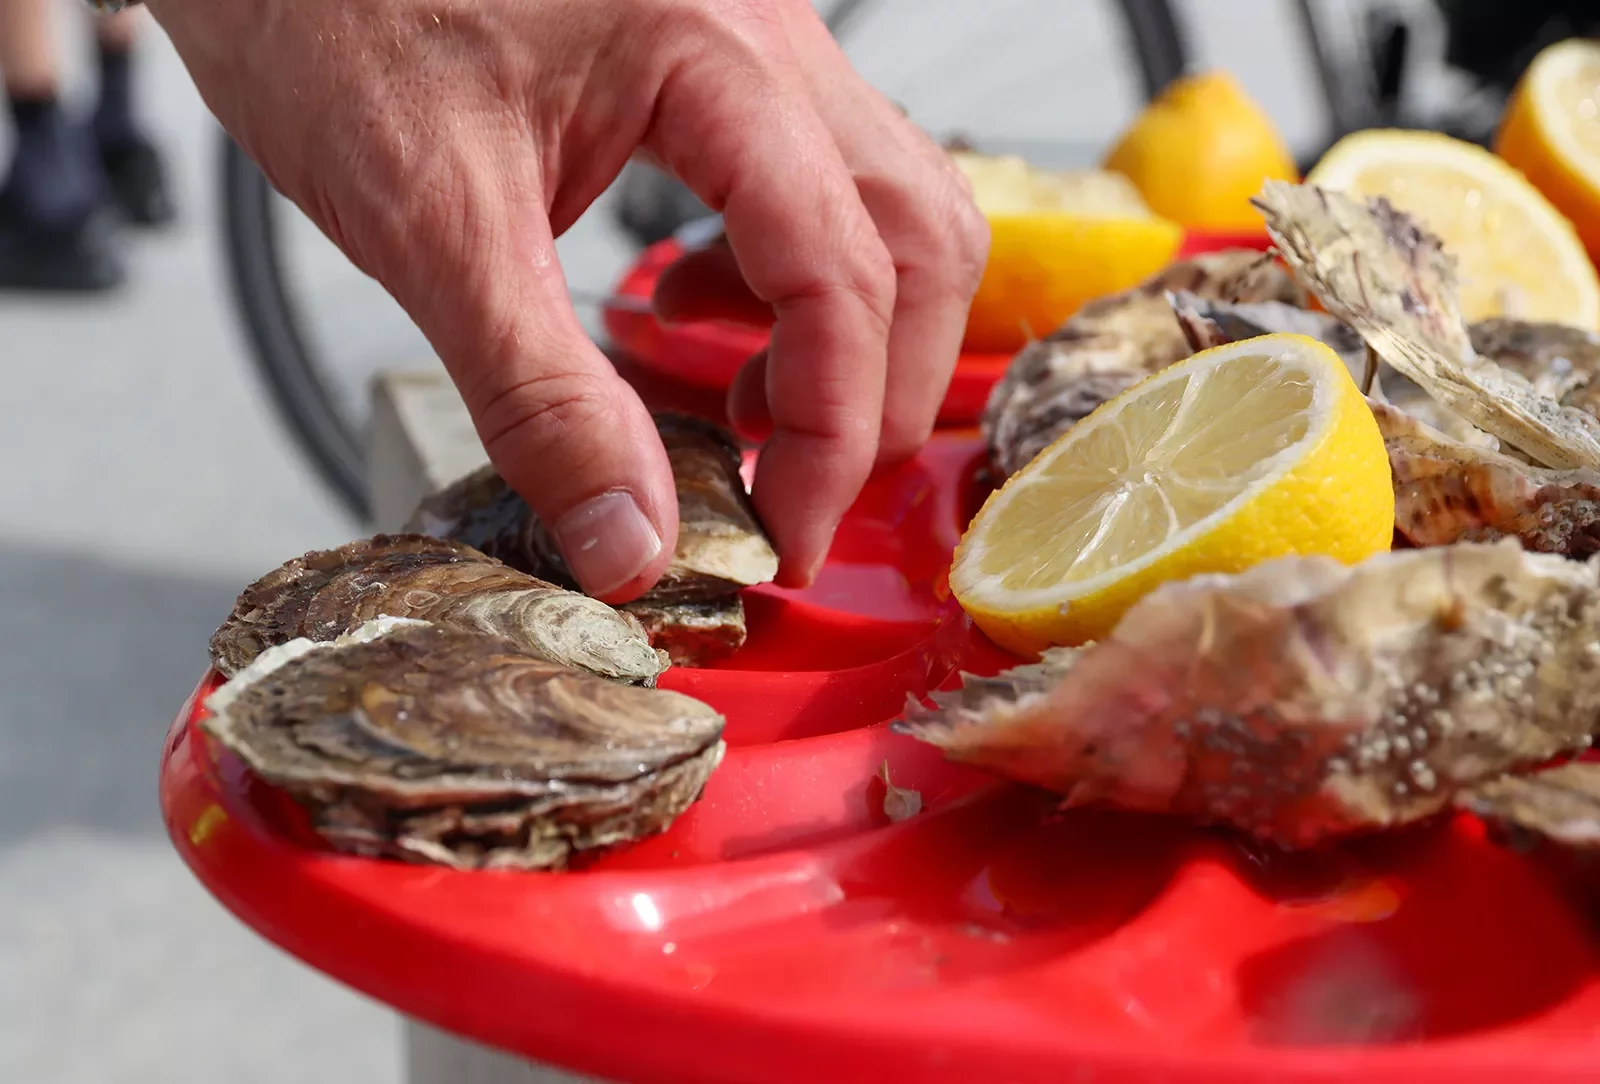 Oysters in Brittany/Normandy